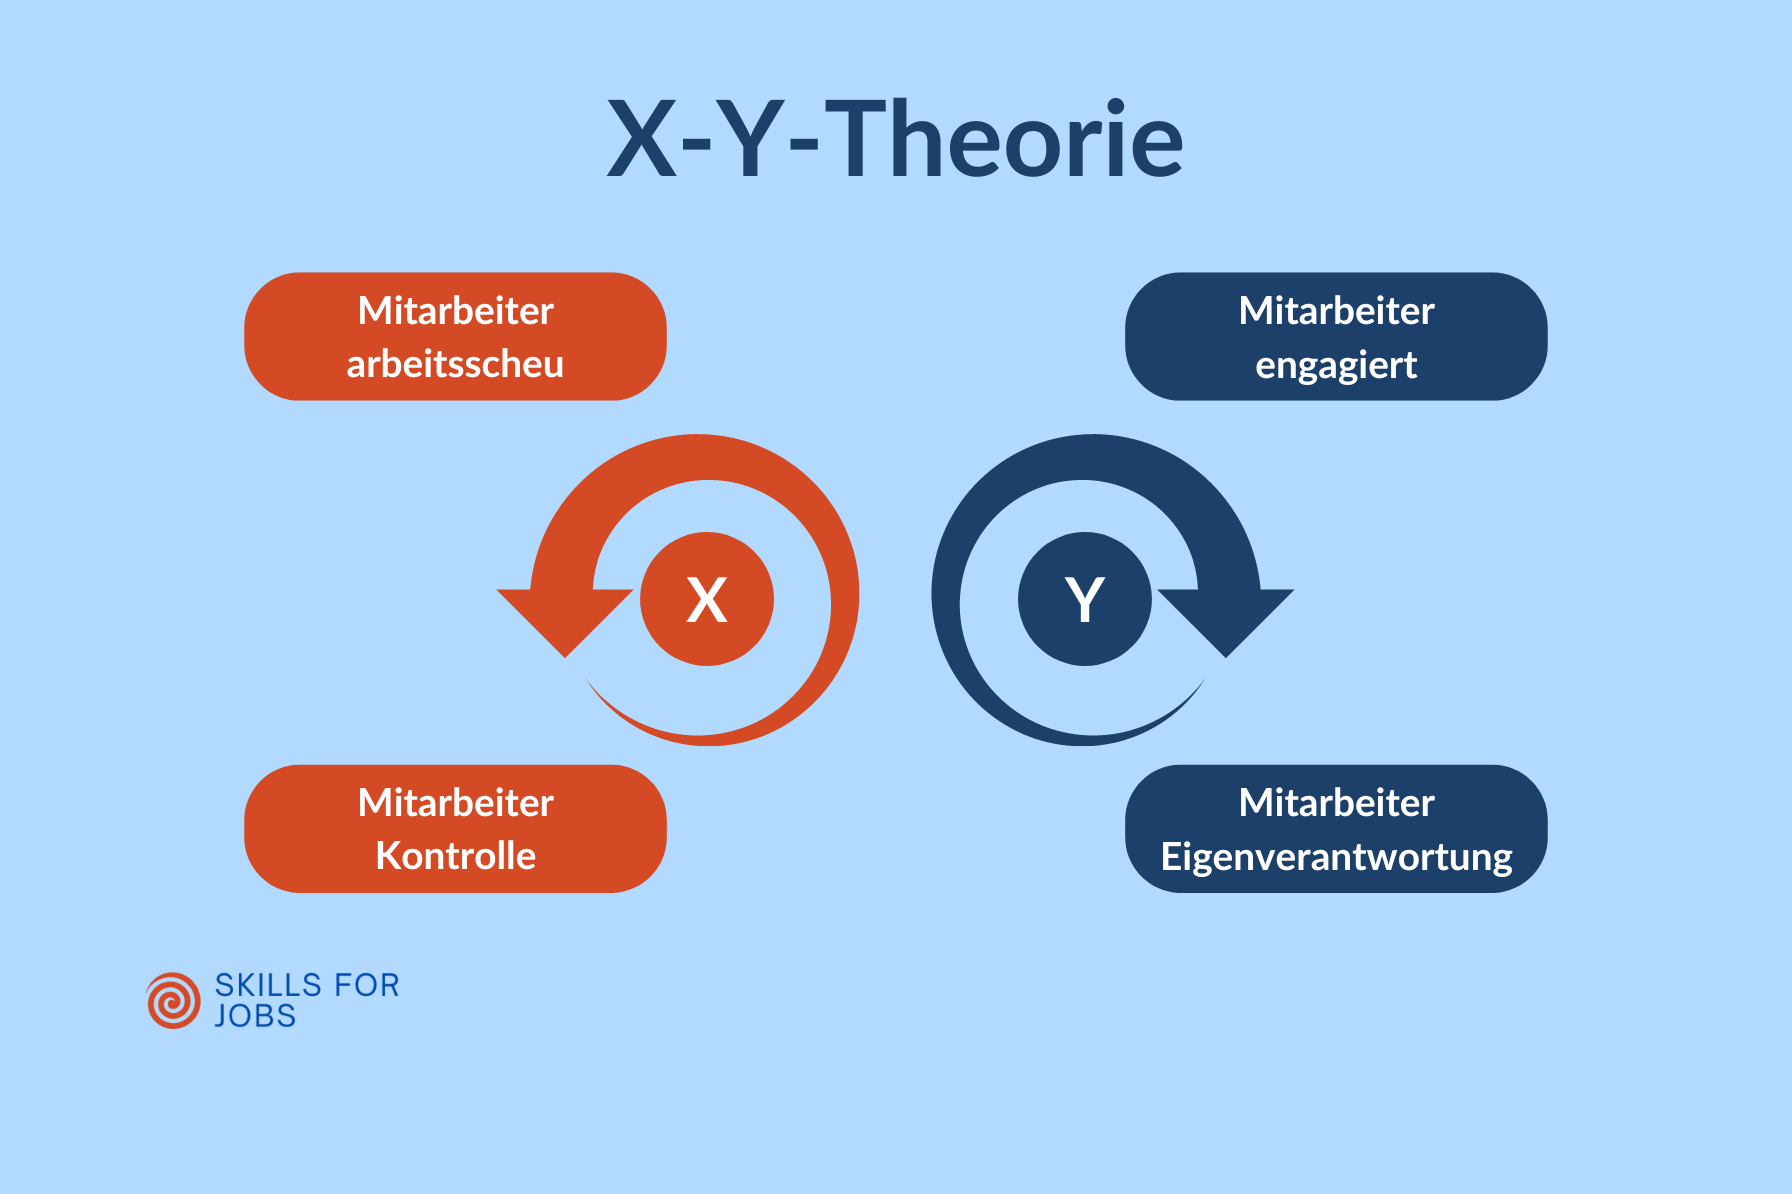 X-Y-Theorie